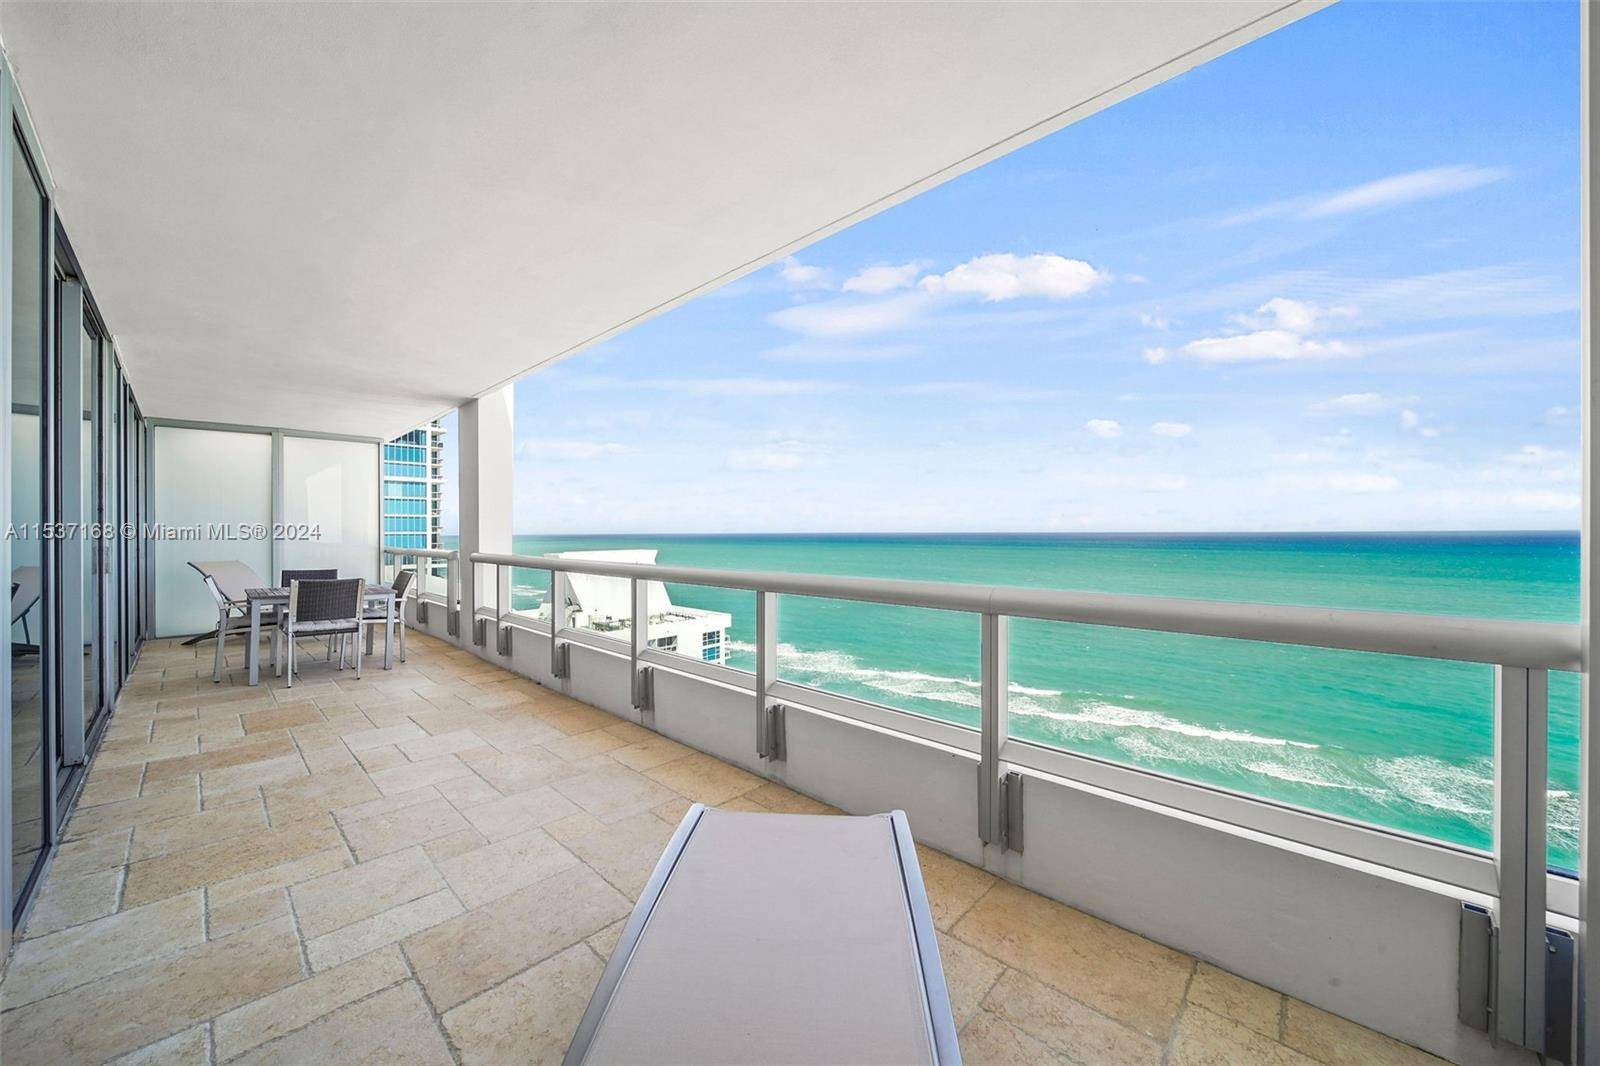 STUNNING DIRECT OCEAN VIEW from all rooms of Penthouse unit with large, deep balcony spanning living and bedrooms at Carillon Miami Wellness Resort, a premier oceanfront luxury property.